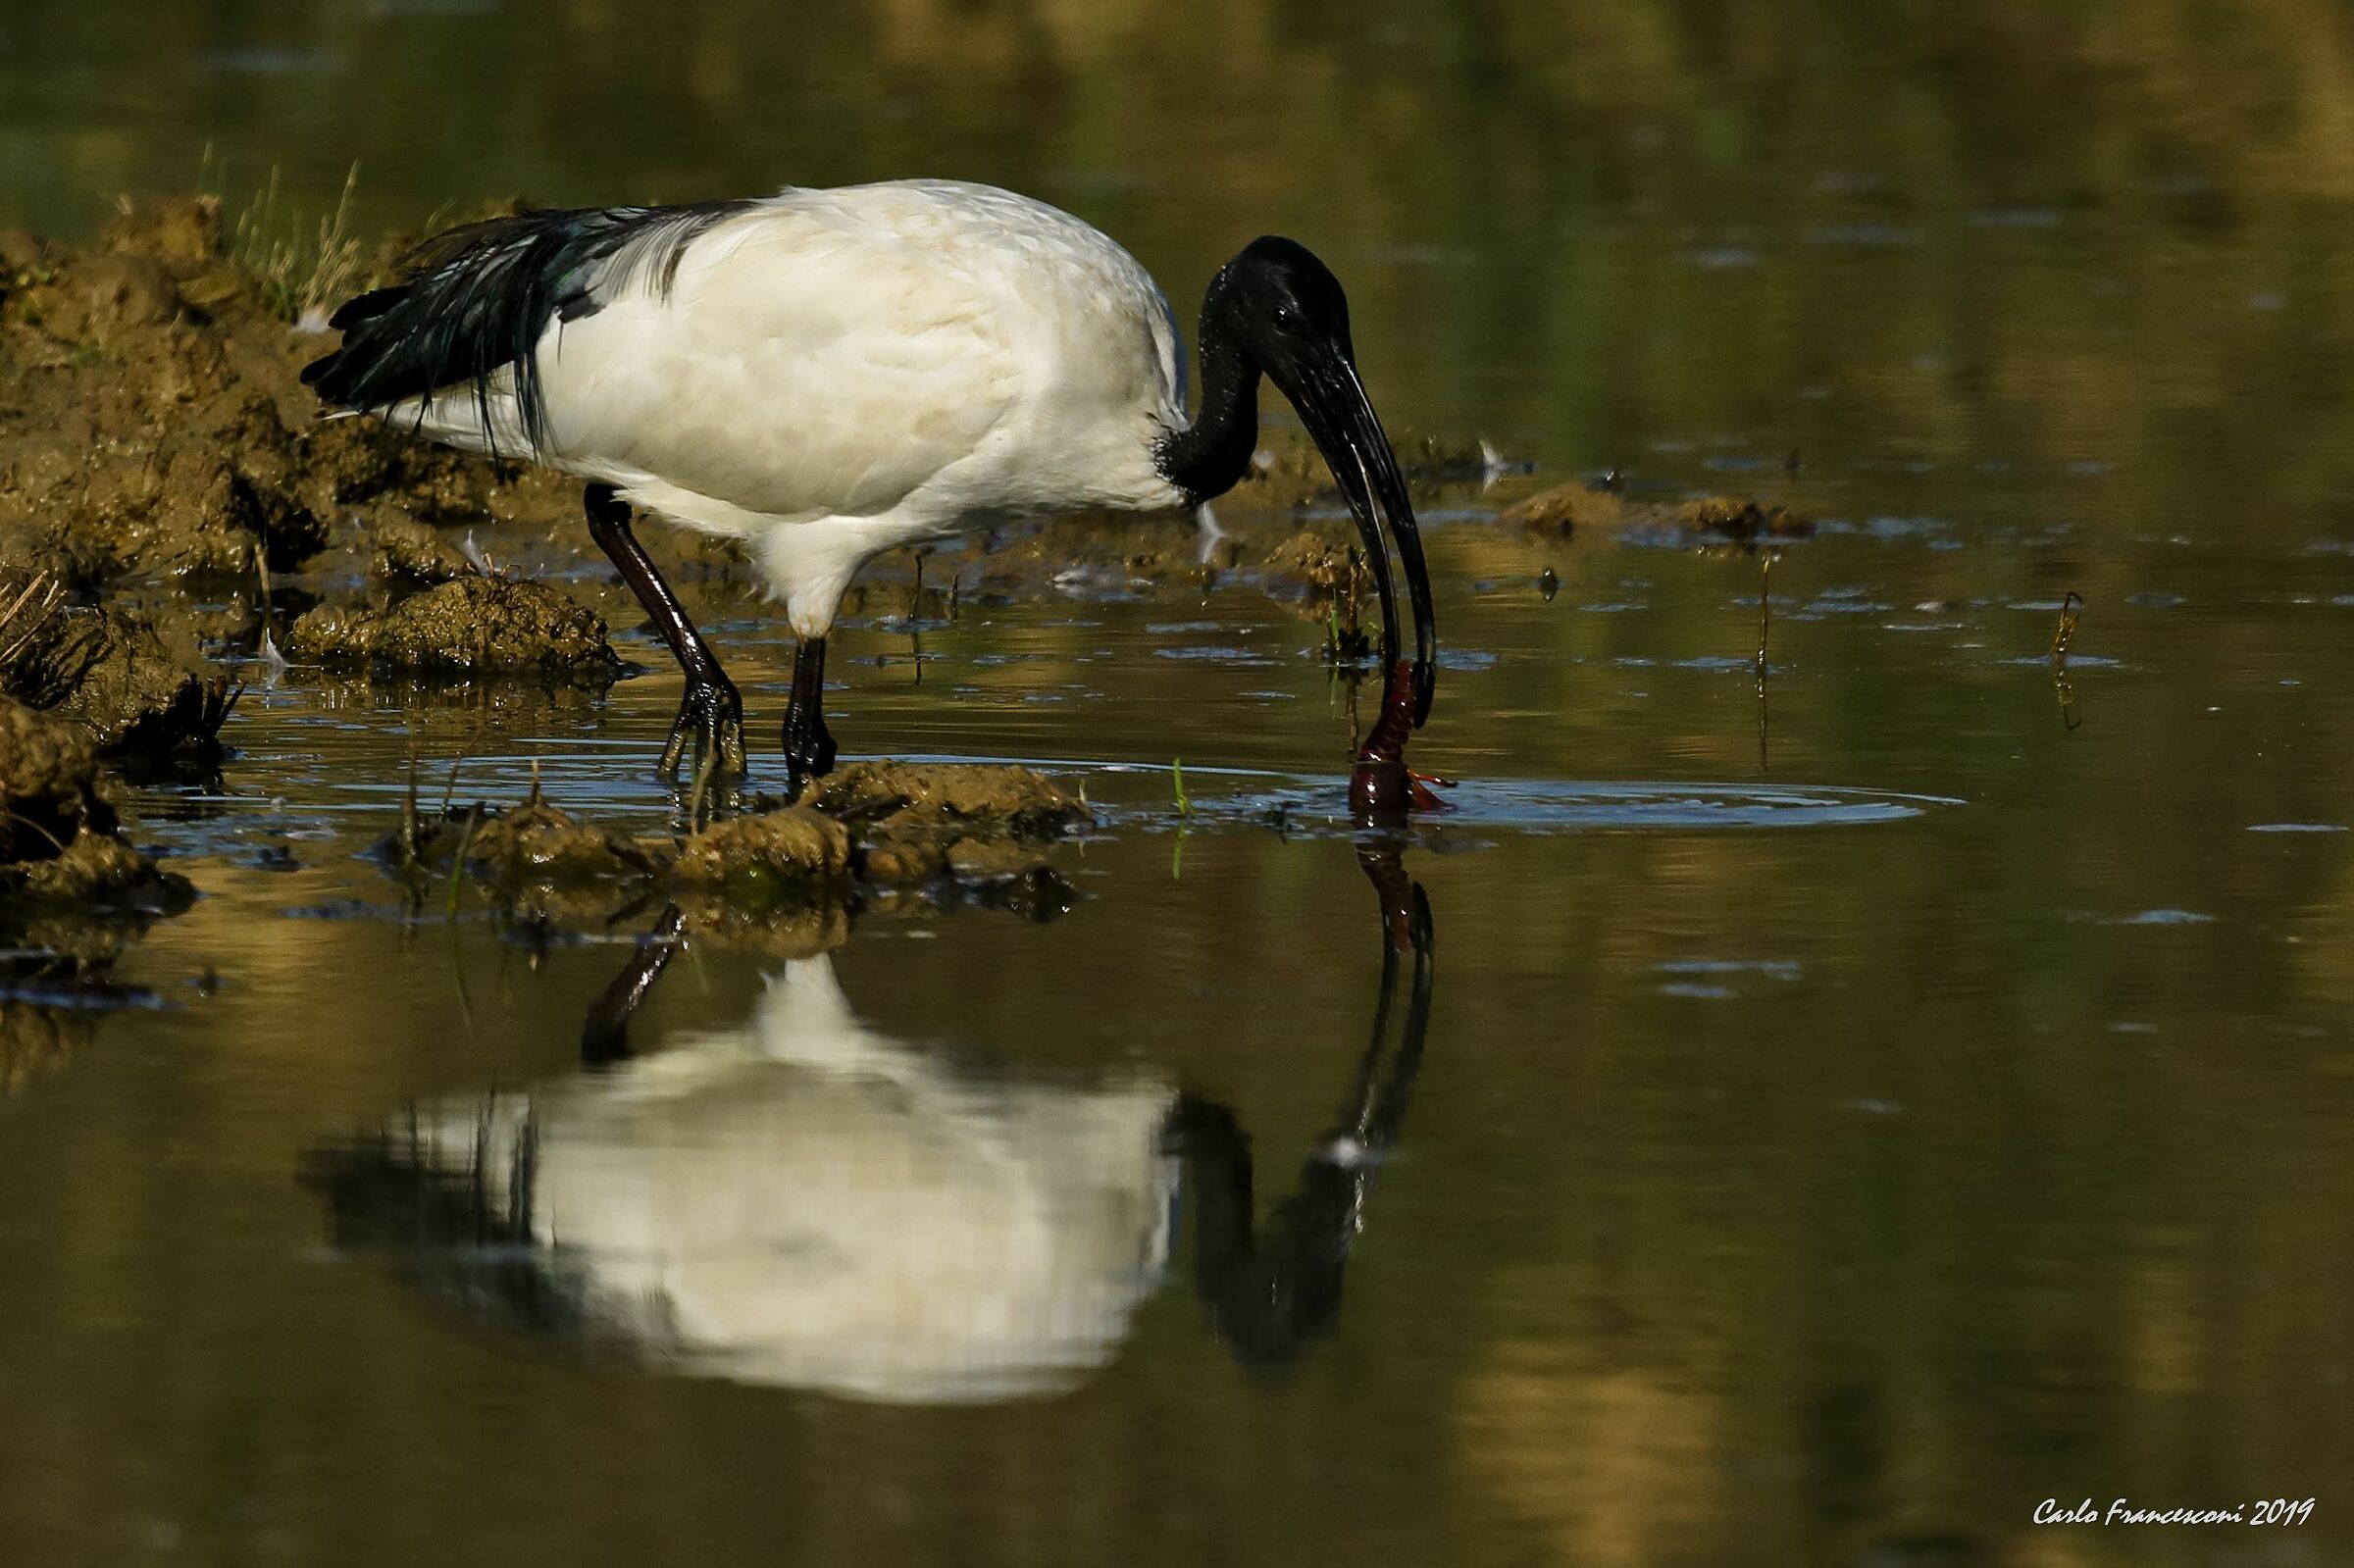 An increasingly hungry Ibis...